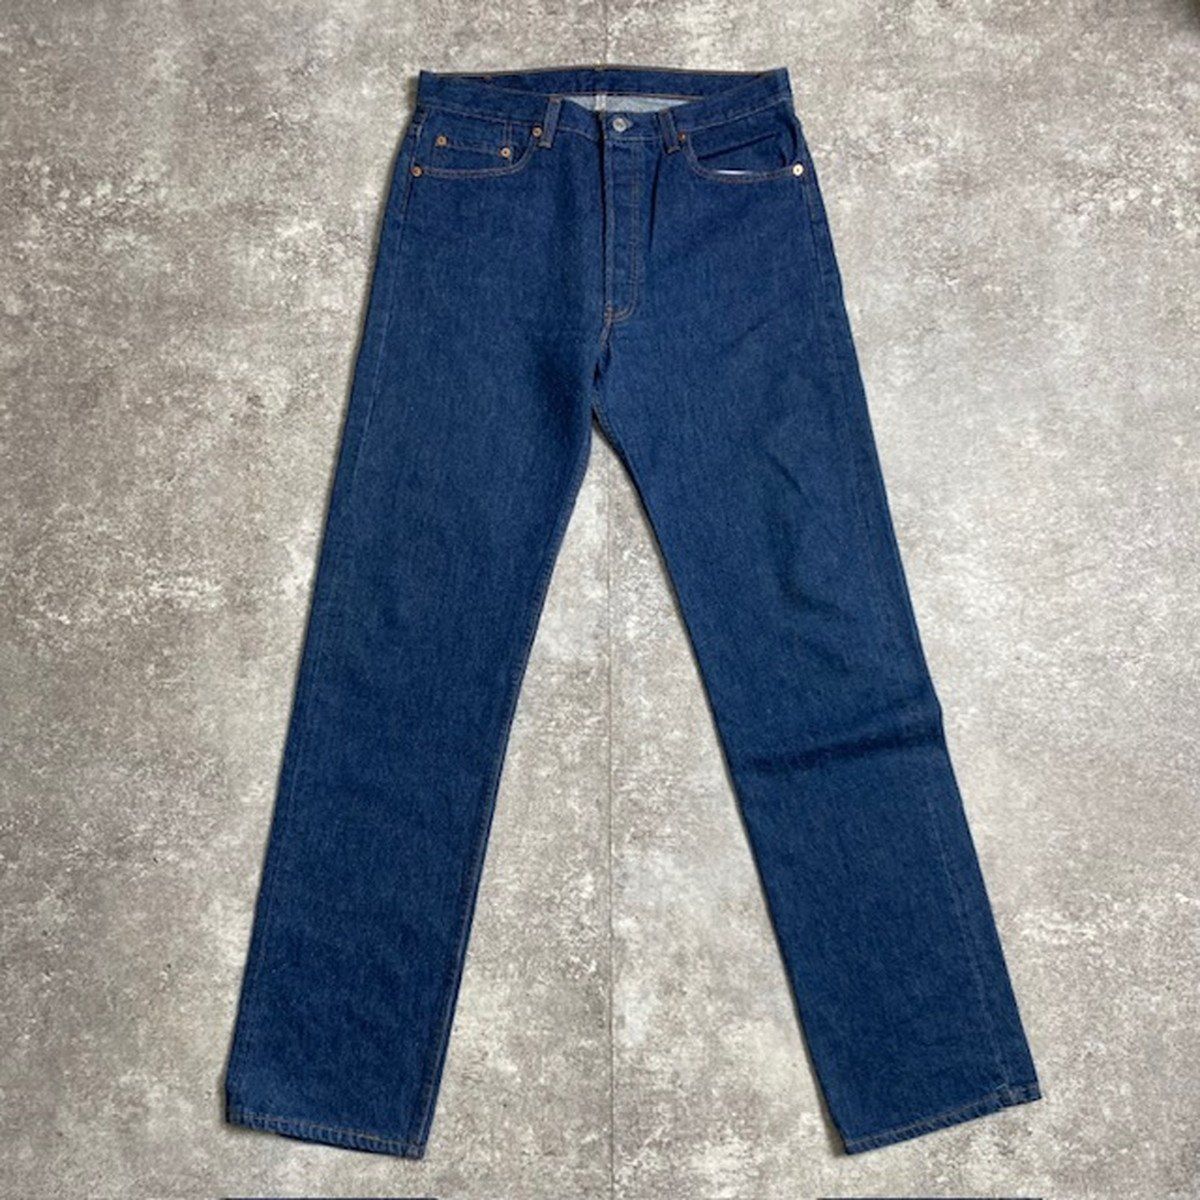 90's Levi's 501 リーバイス 復刻 USA製 W34 刻印532 赤タブ 脇割 ヴィンテージ